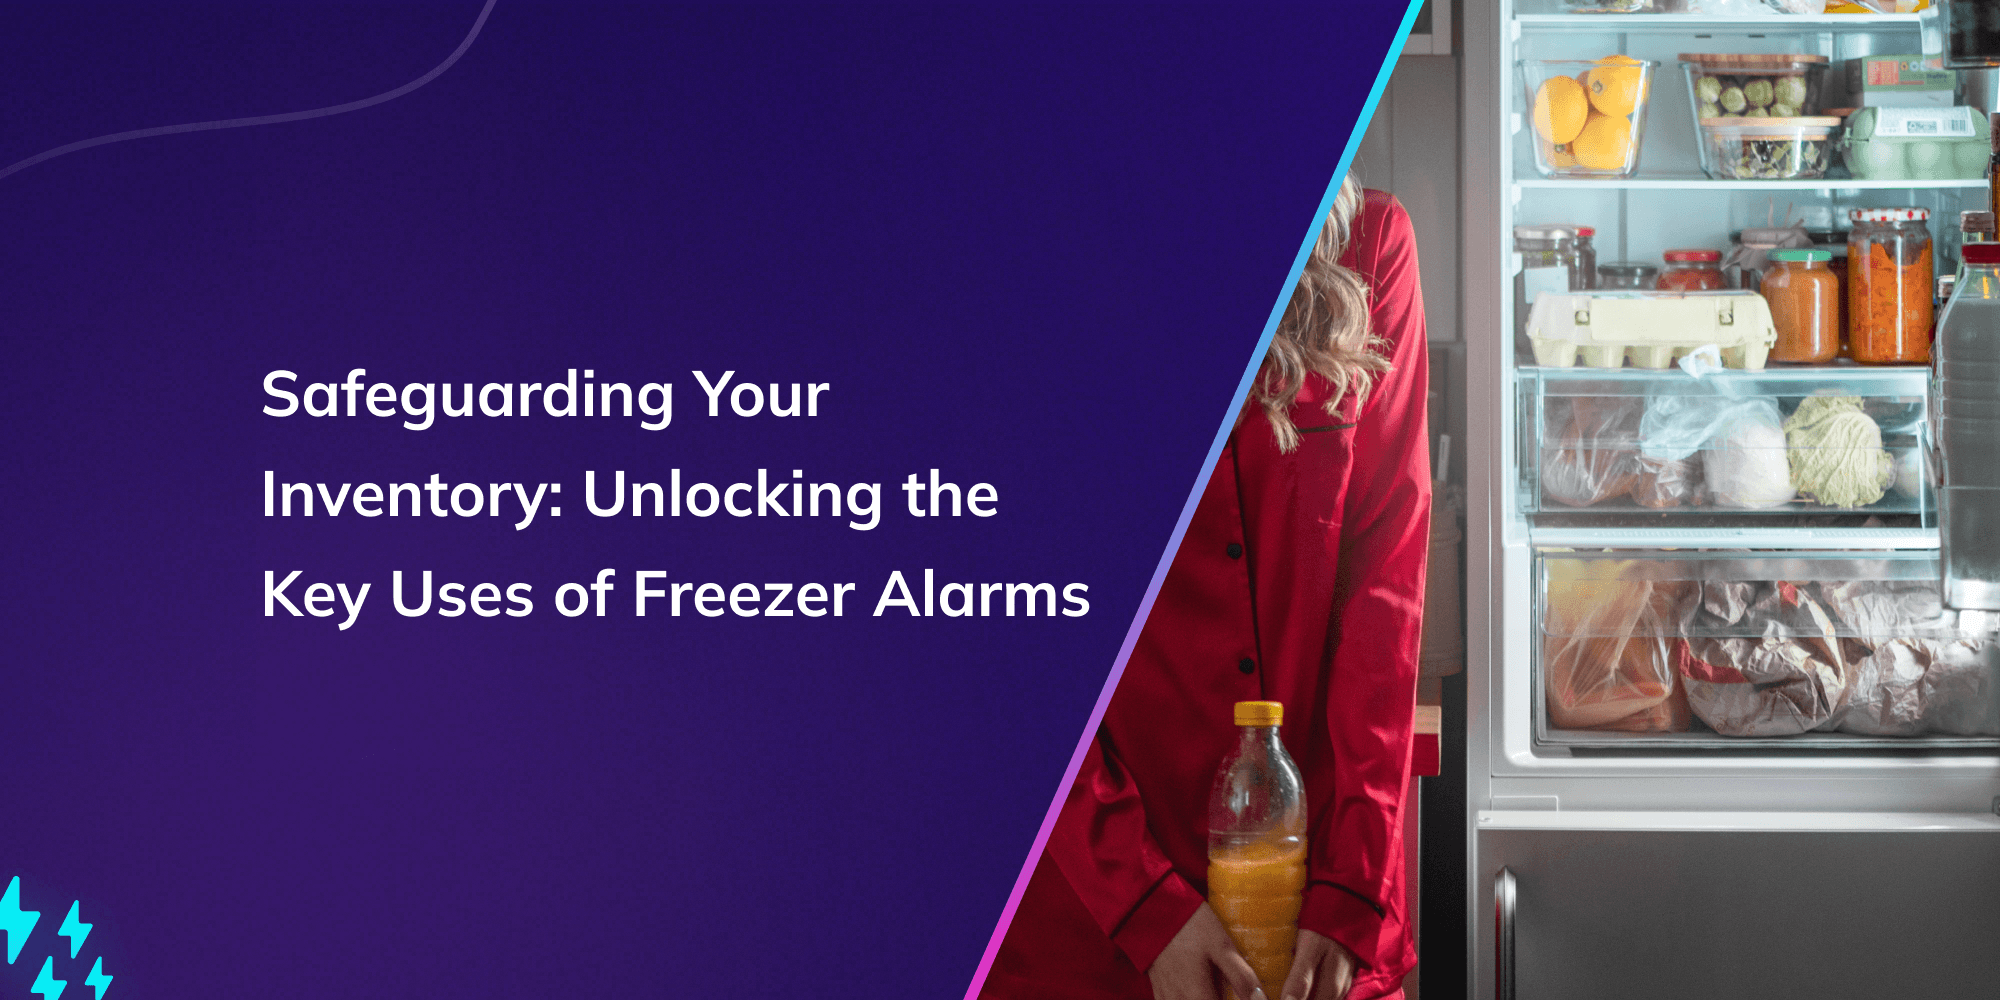 Safeguarding Your Inventory: Unlocking the Key Uses of Freezer Alarms